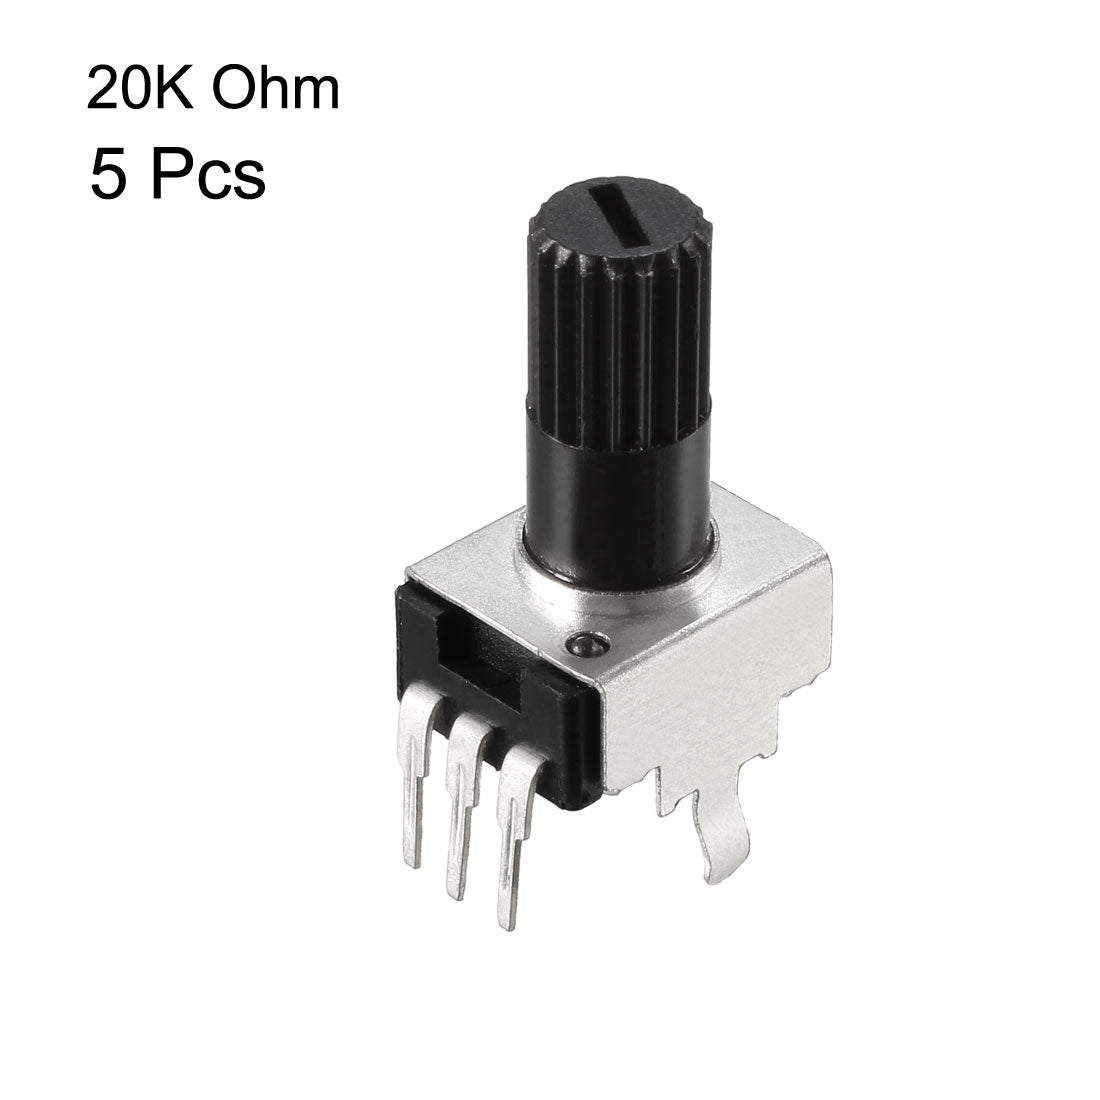 uxcell Uxcell Potentiometer 20K Ohm Variable Resistors Single Turn Rotary Carbon Film 5pcs